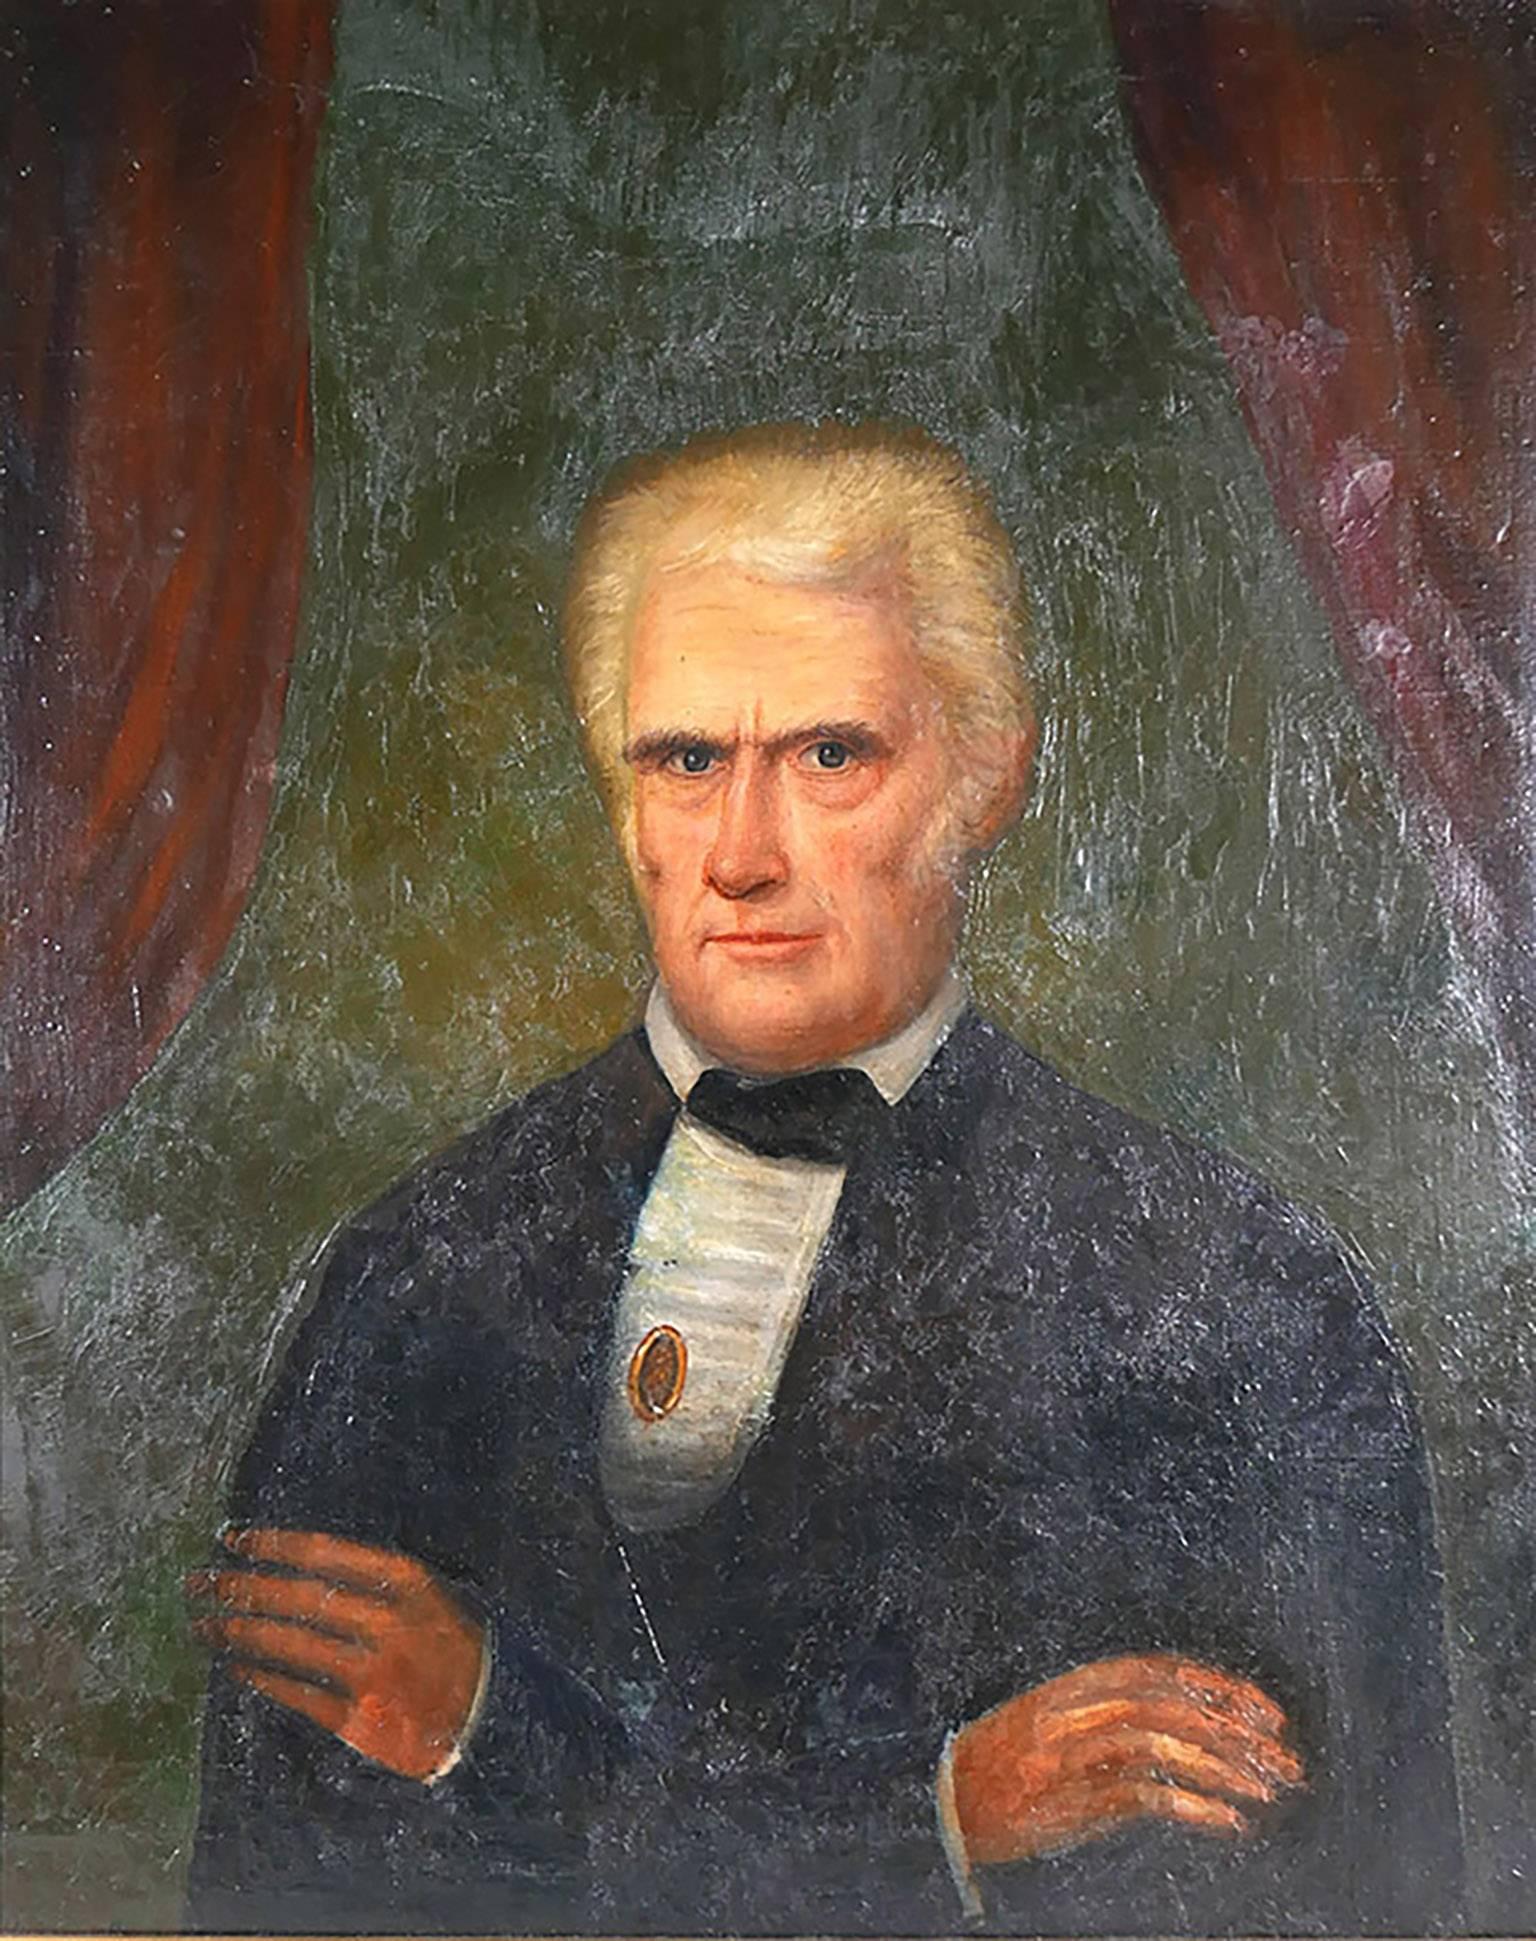 Early 19th Century Folk Art Portrait of President Andrew Jackson - Black Portrait Painting by Unknown